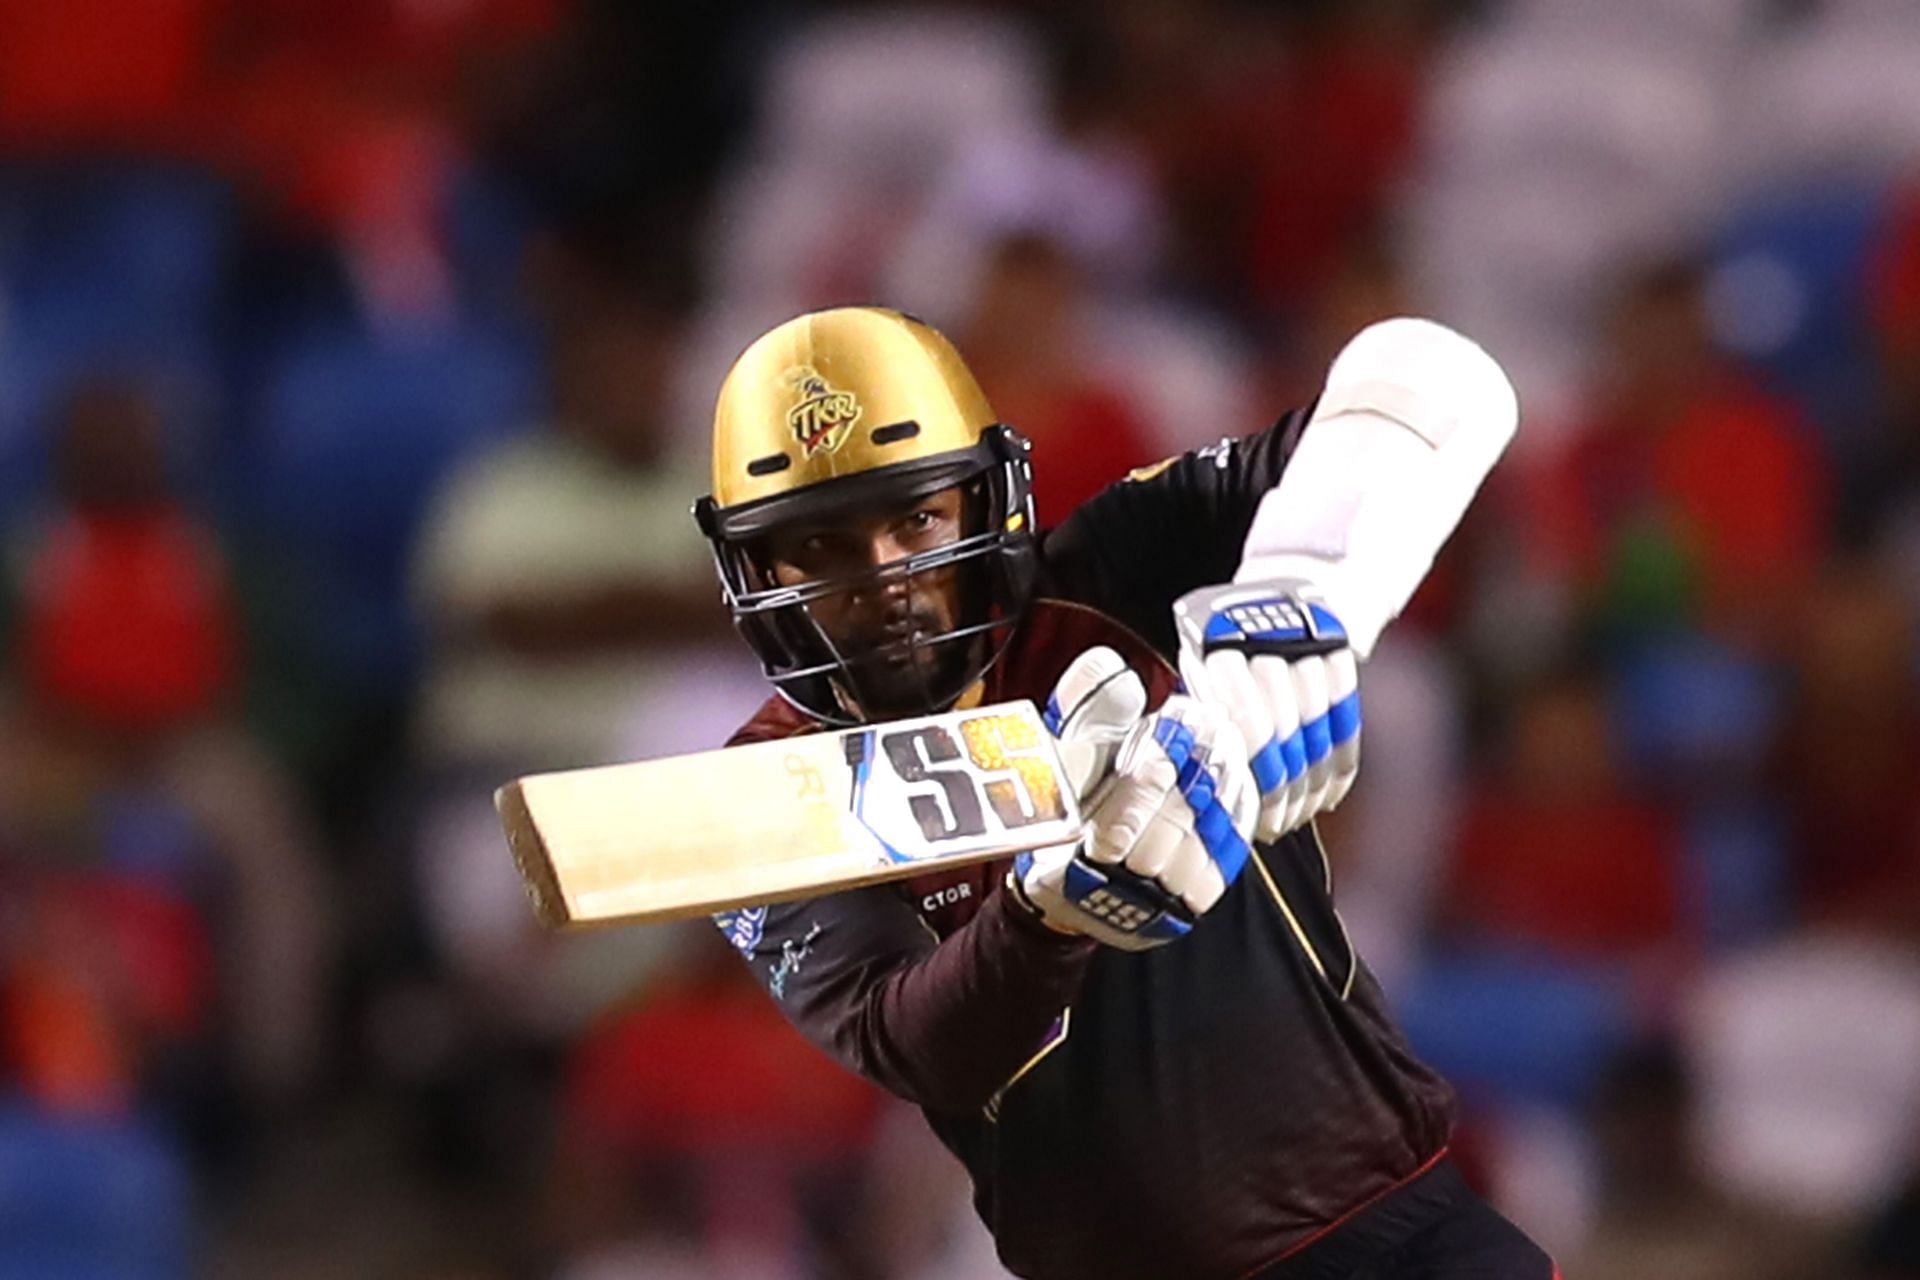 Denesh Ramdin could prove to be an influential player for his side